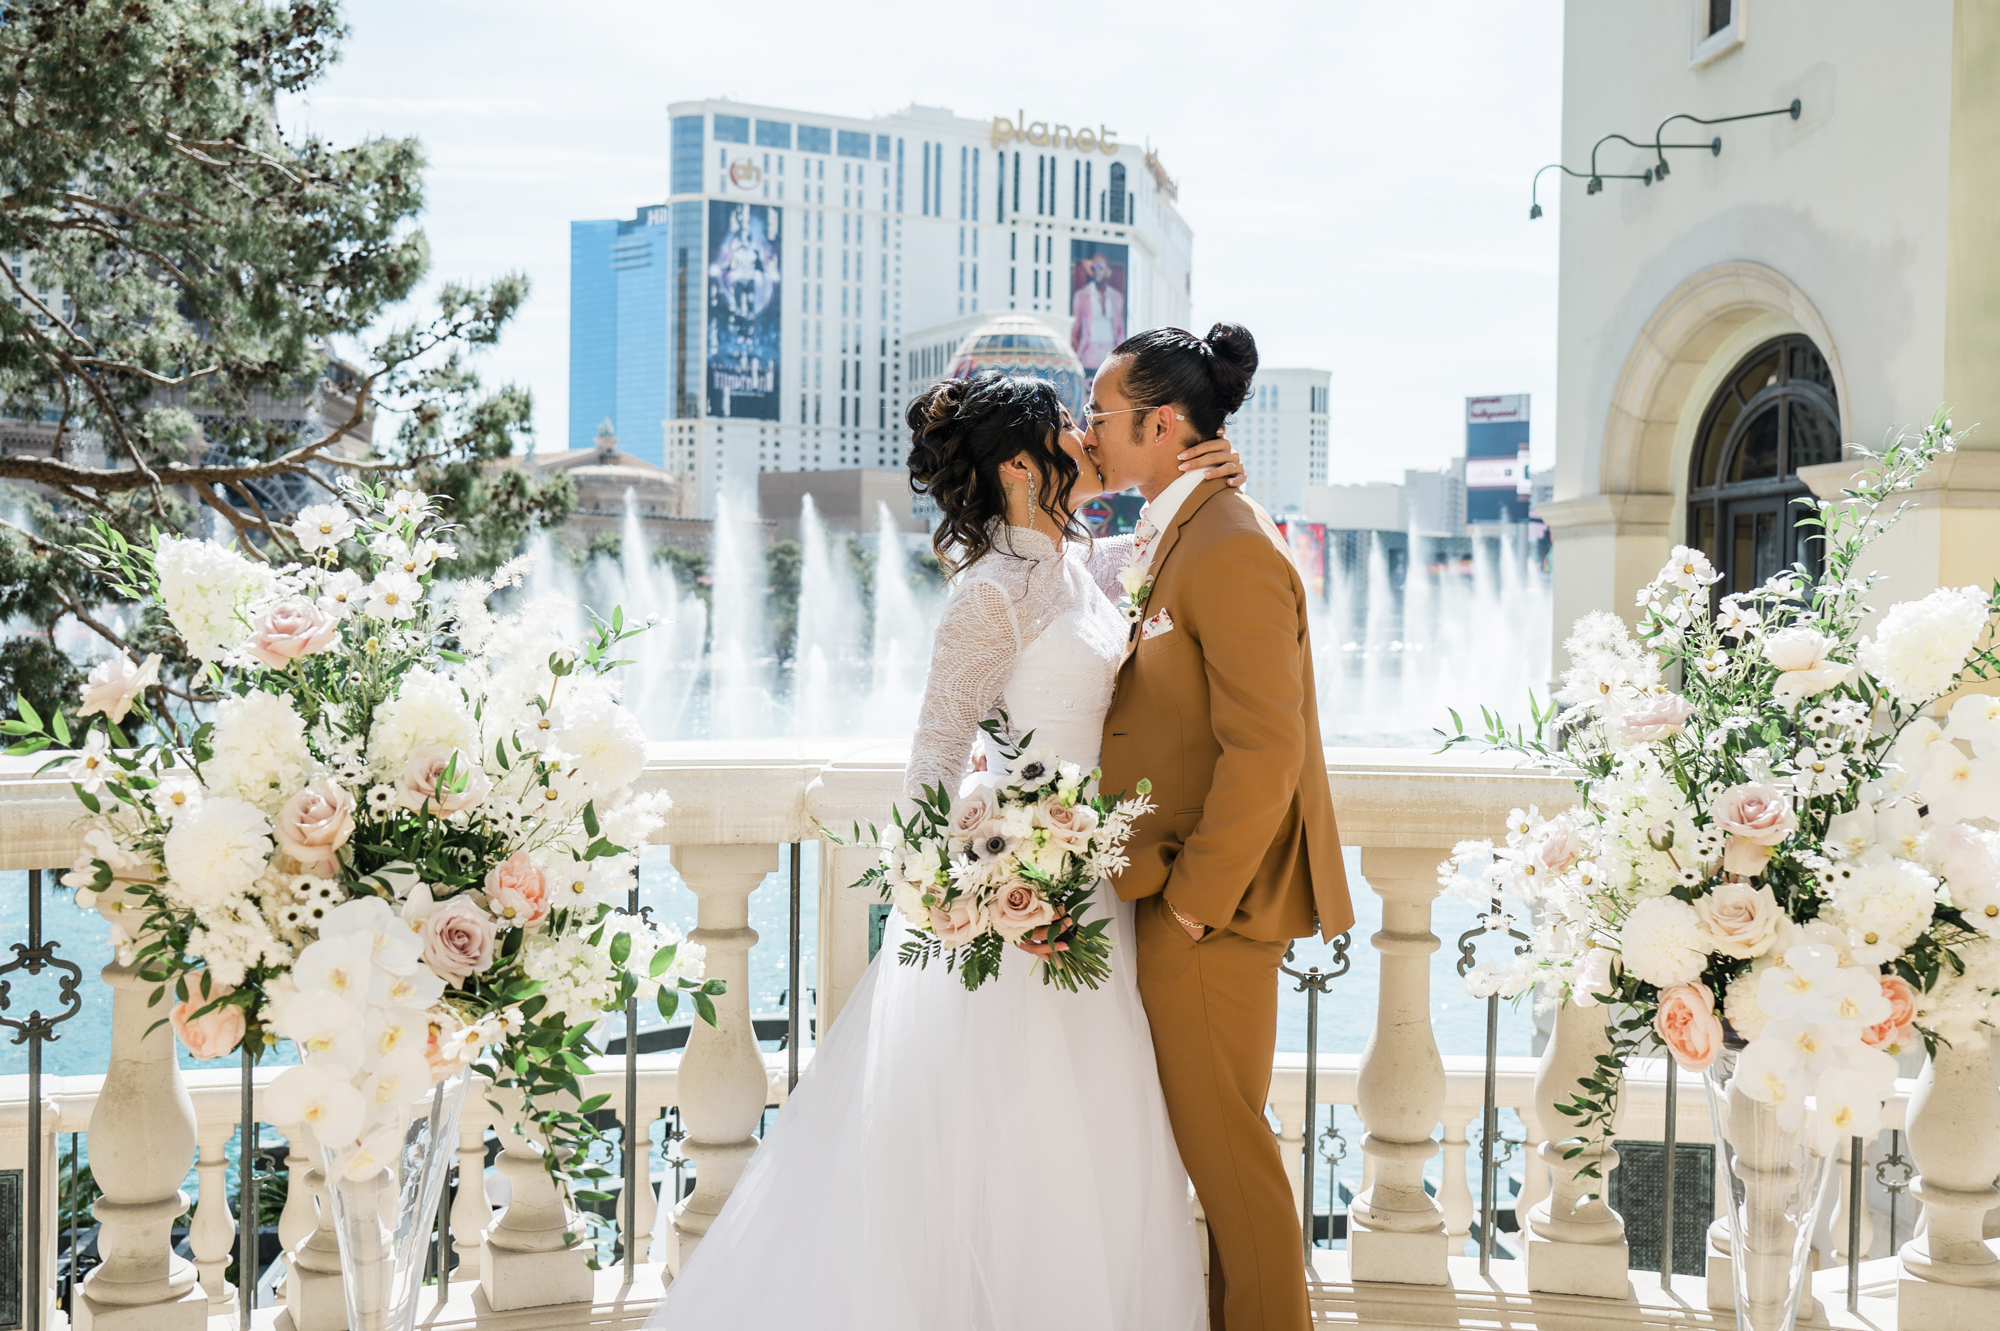 Stylish Micro Weddings At The Bellagio Now Available